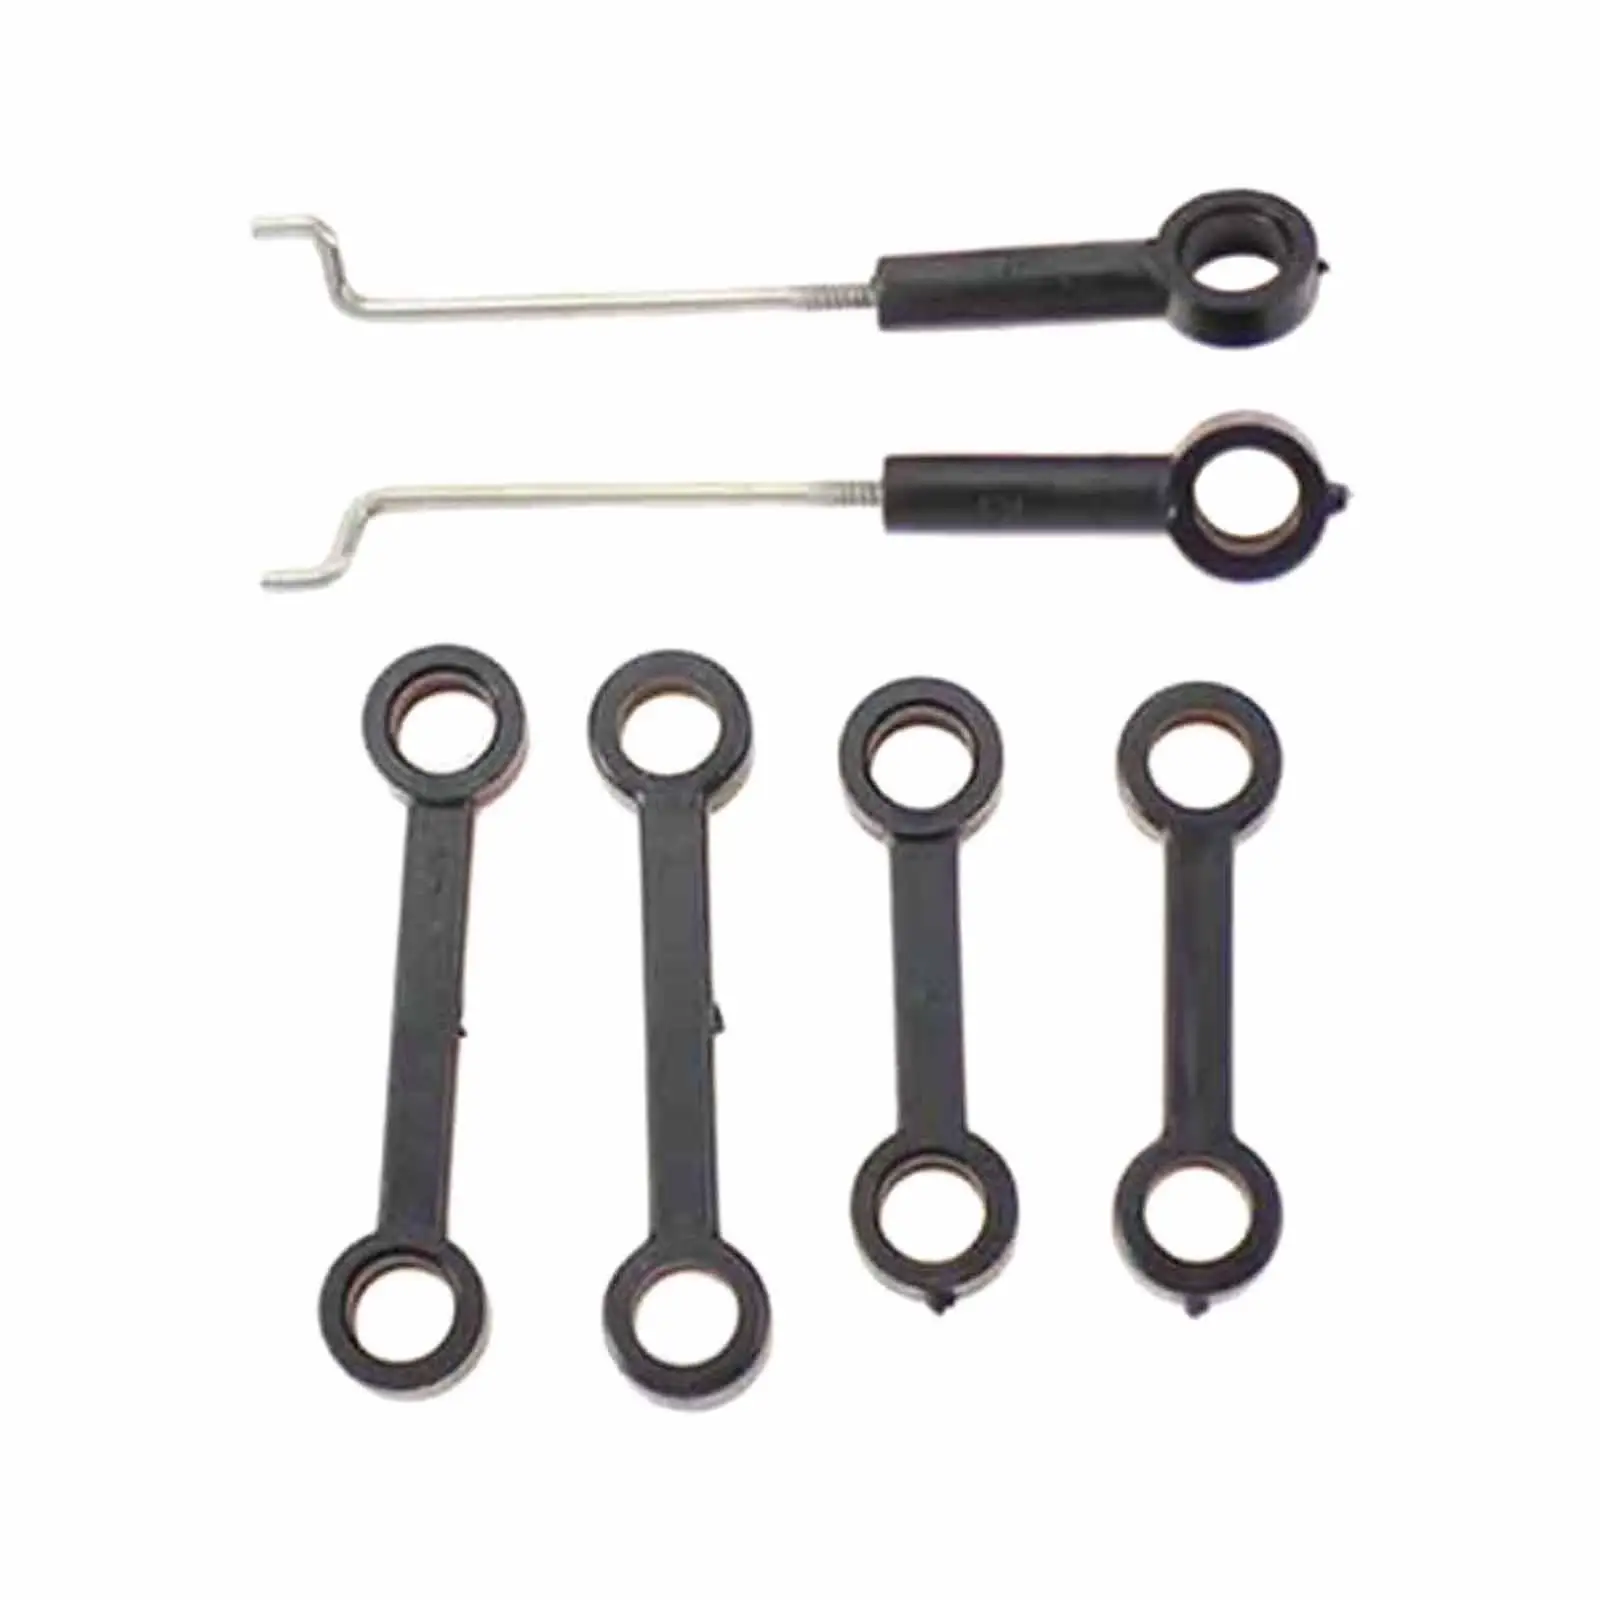 6 Pieces RC Helicopter Connect Buckle Spare Parts for V912 Airplane Quadcopter DIY Modified Parts